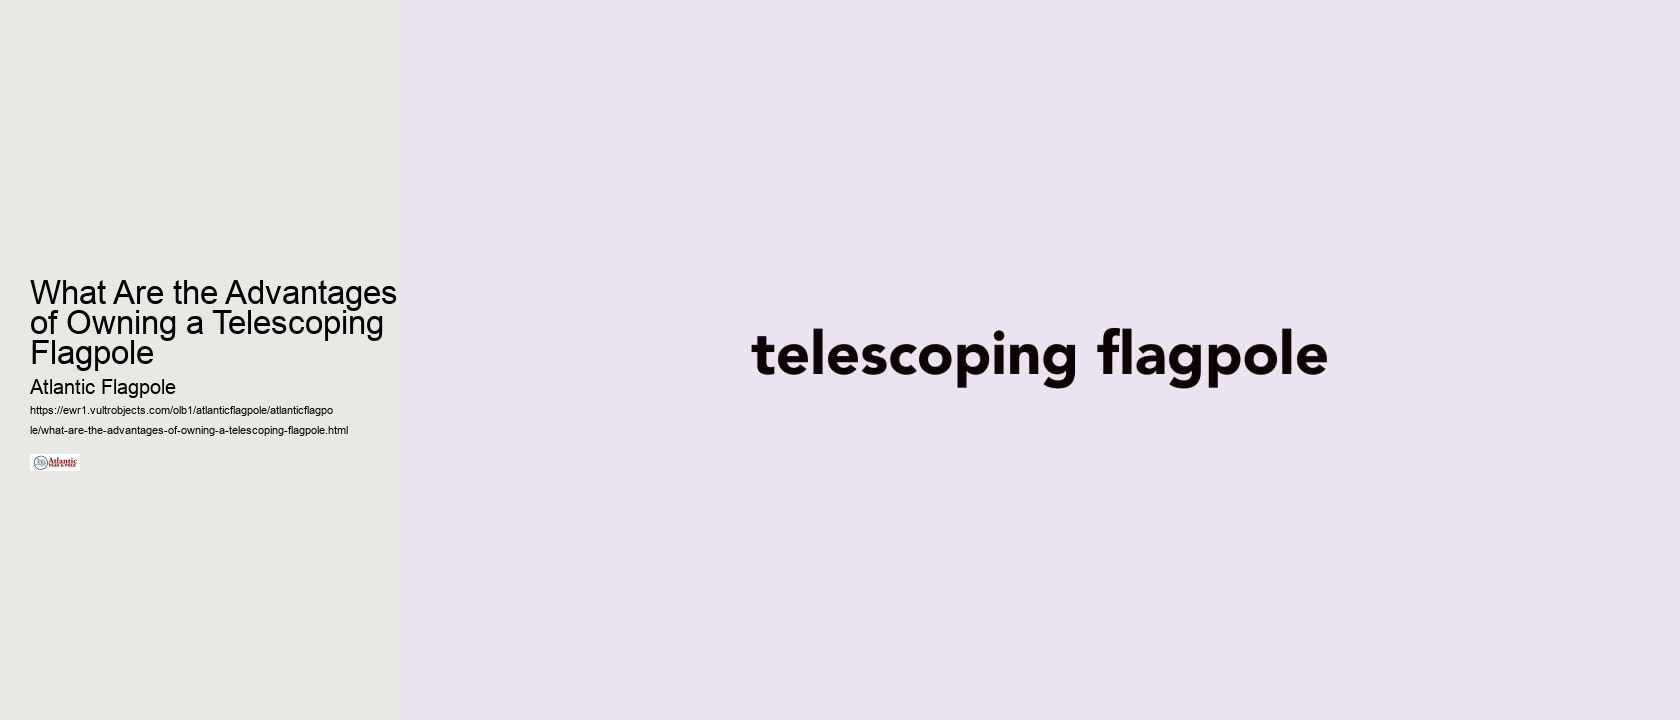 What Are the Advantages of Owning a Telescoping Flagpole